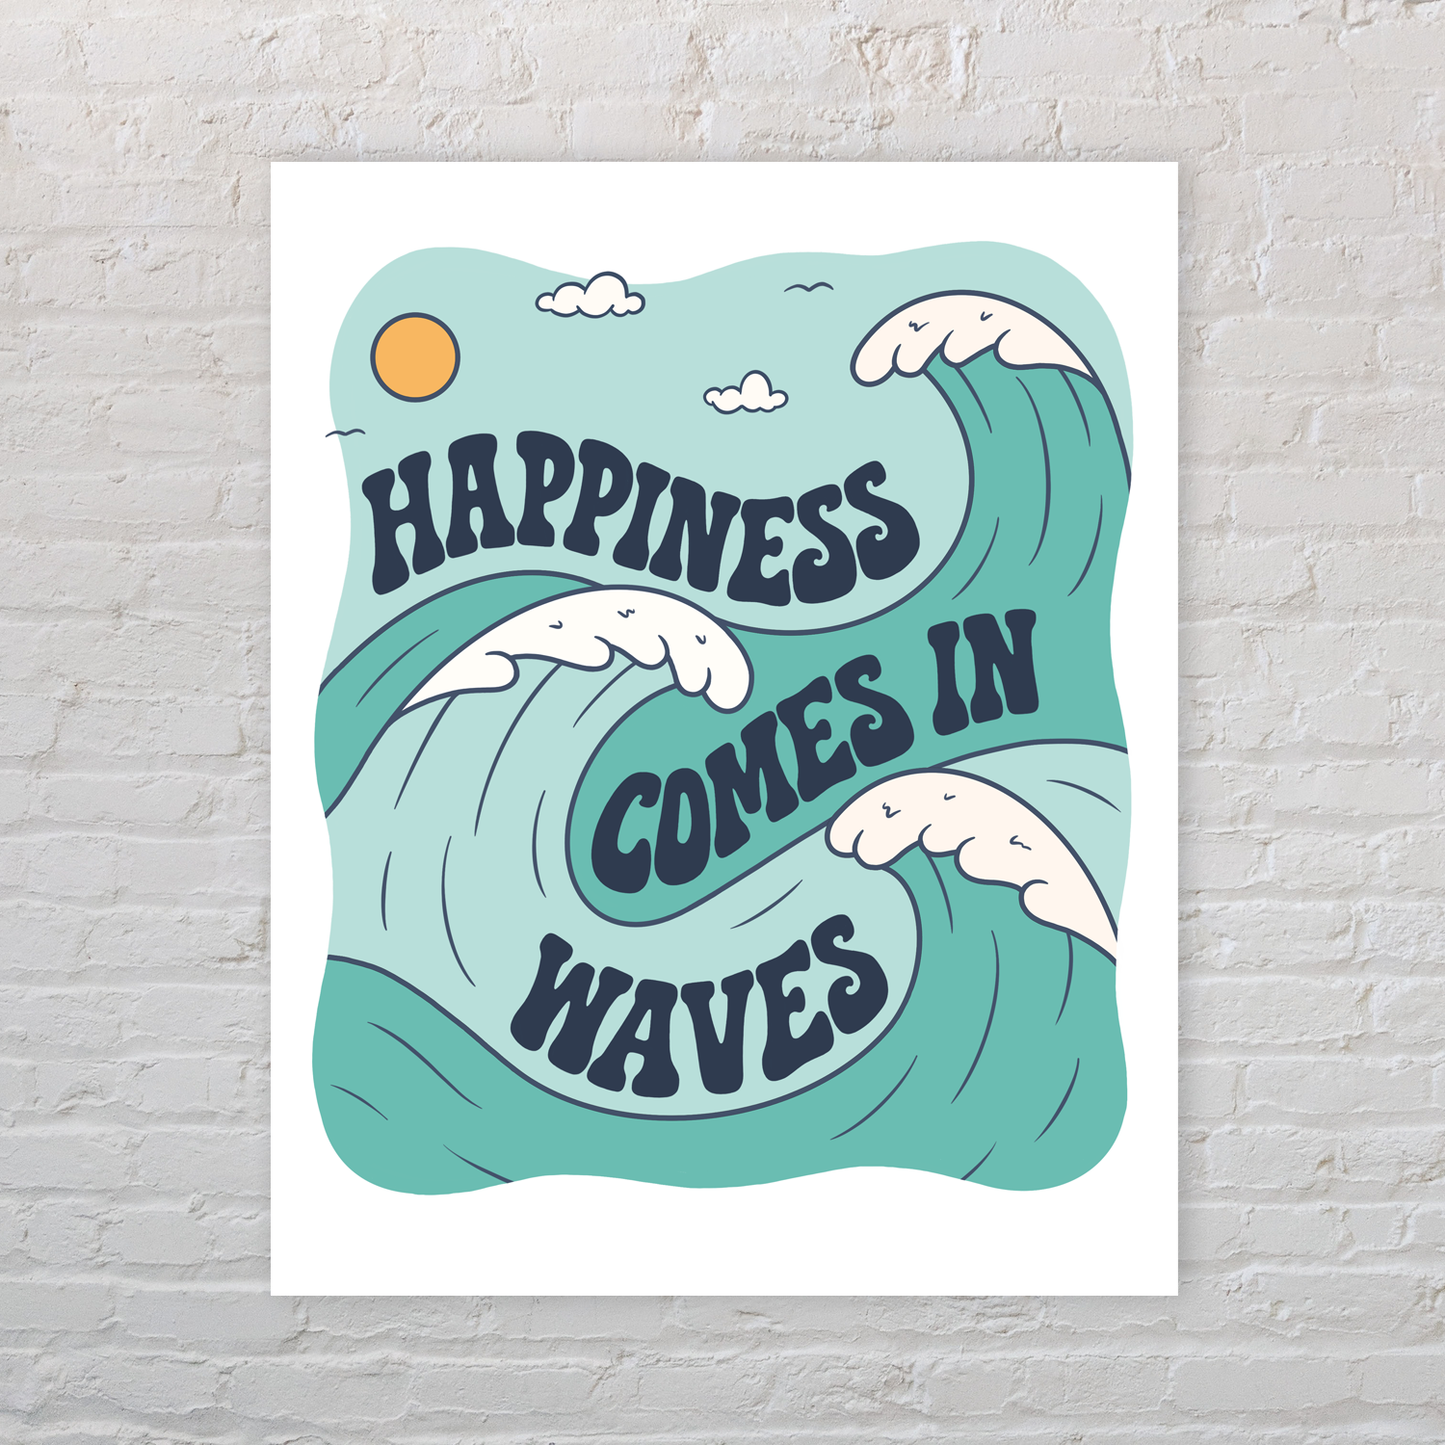 Happiness Comes In Waves Wall Art Print